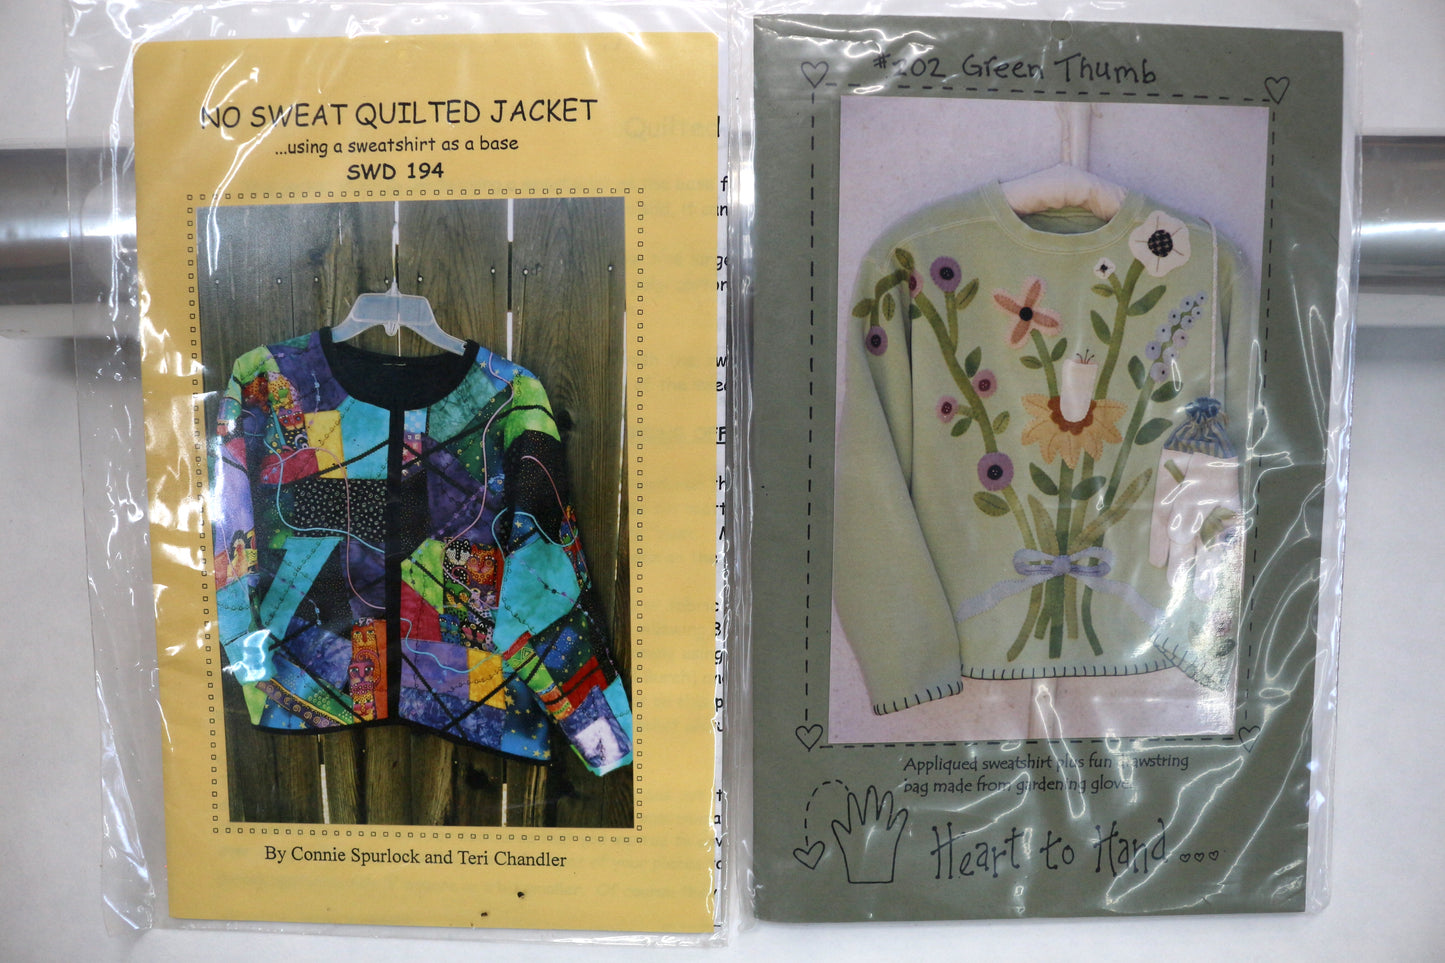 No Sweat Quilted Jacket Pattern or Heart to Hand Green Thumb Pattern